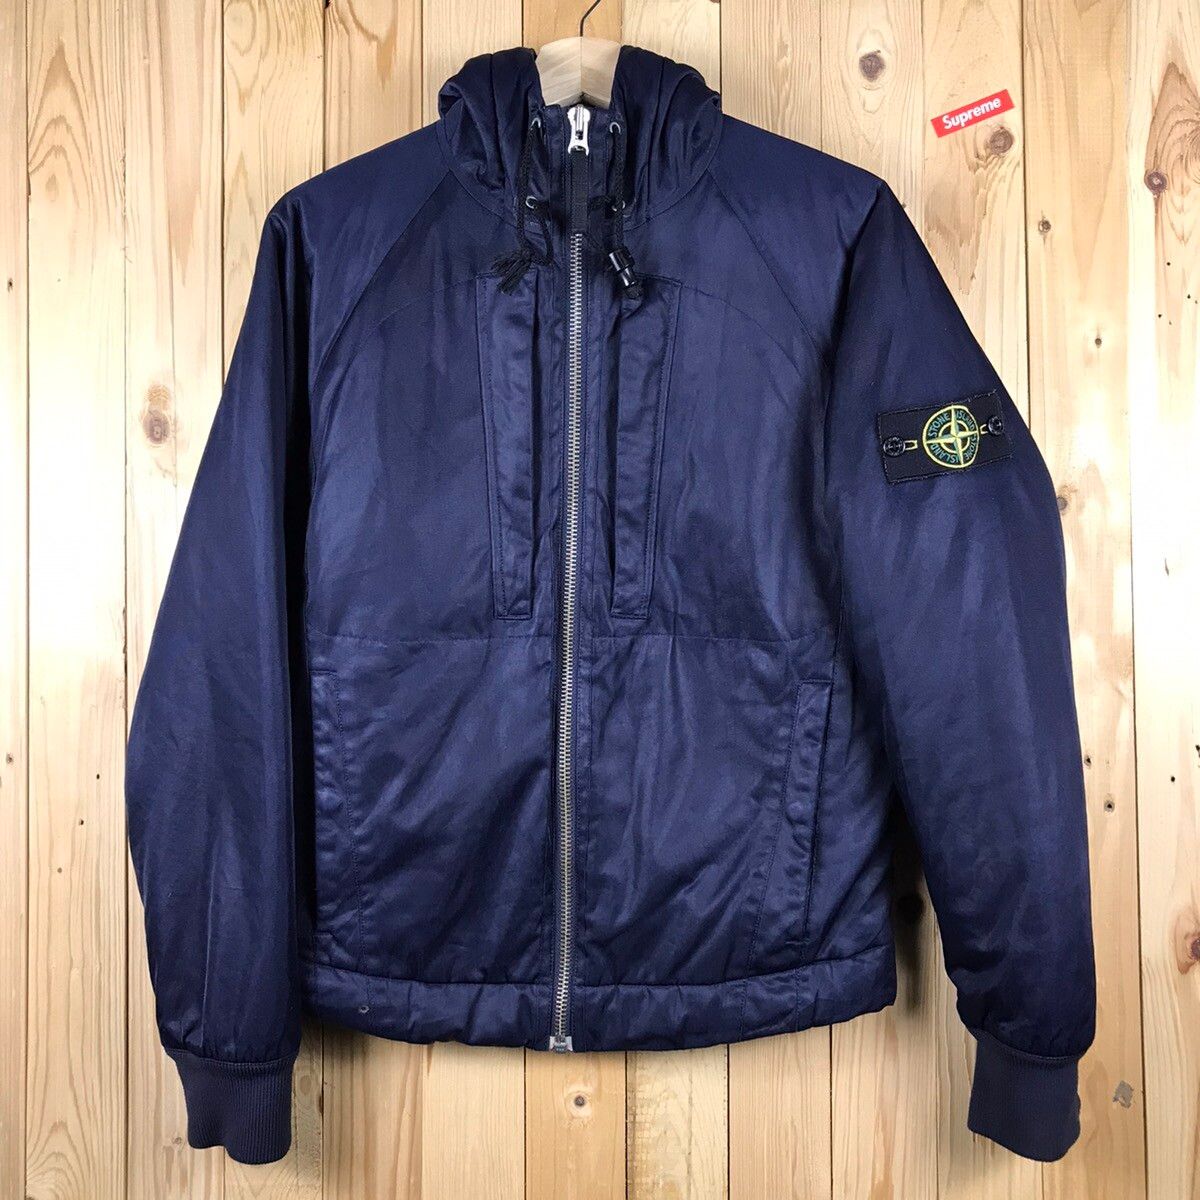 Stone Island 90s stone island puffer style jacket with hoodie | Grailed